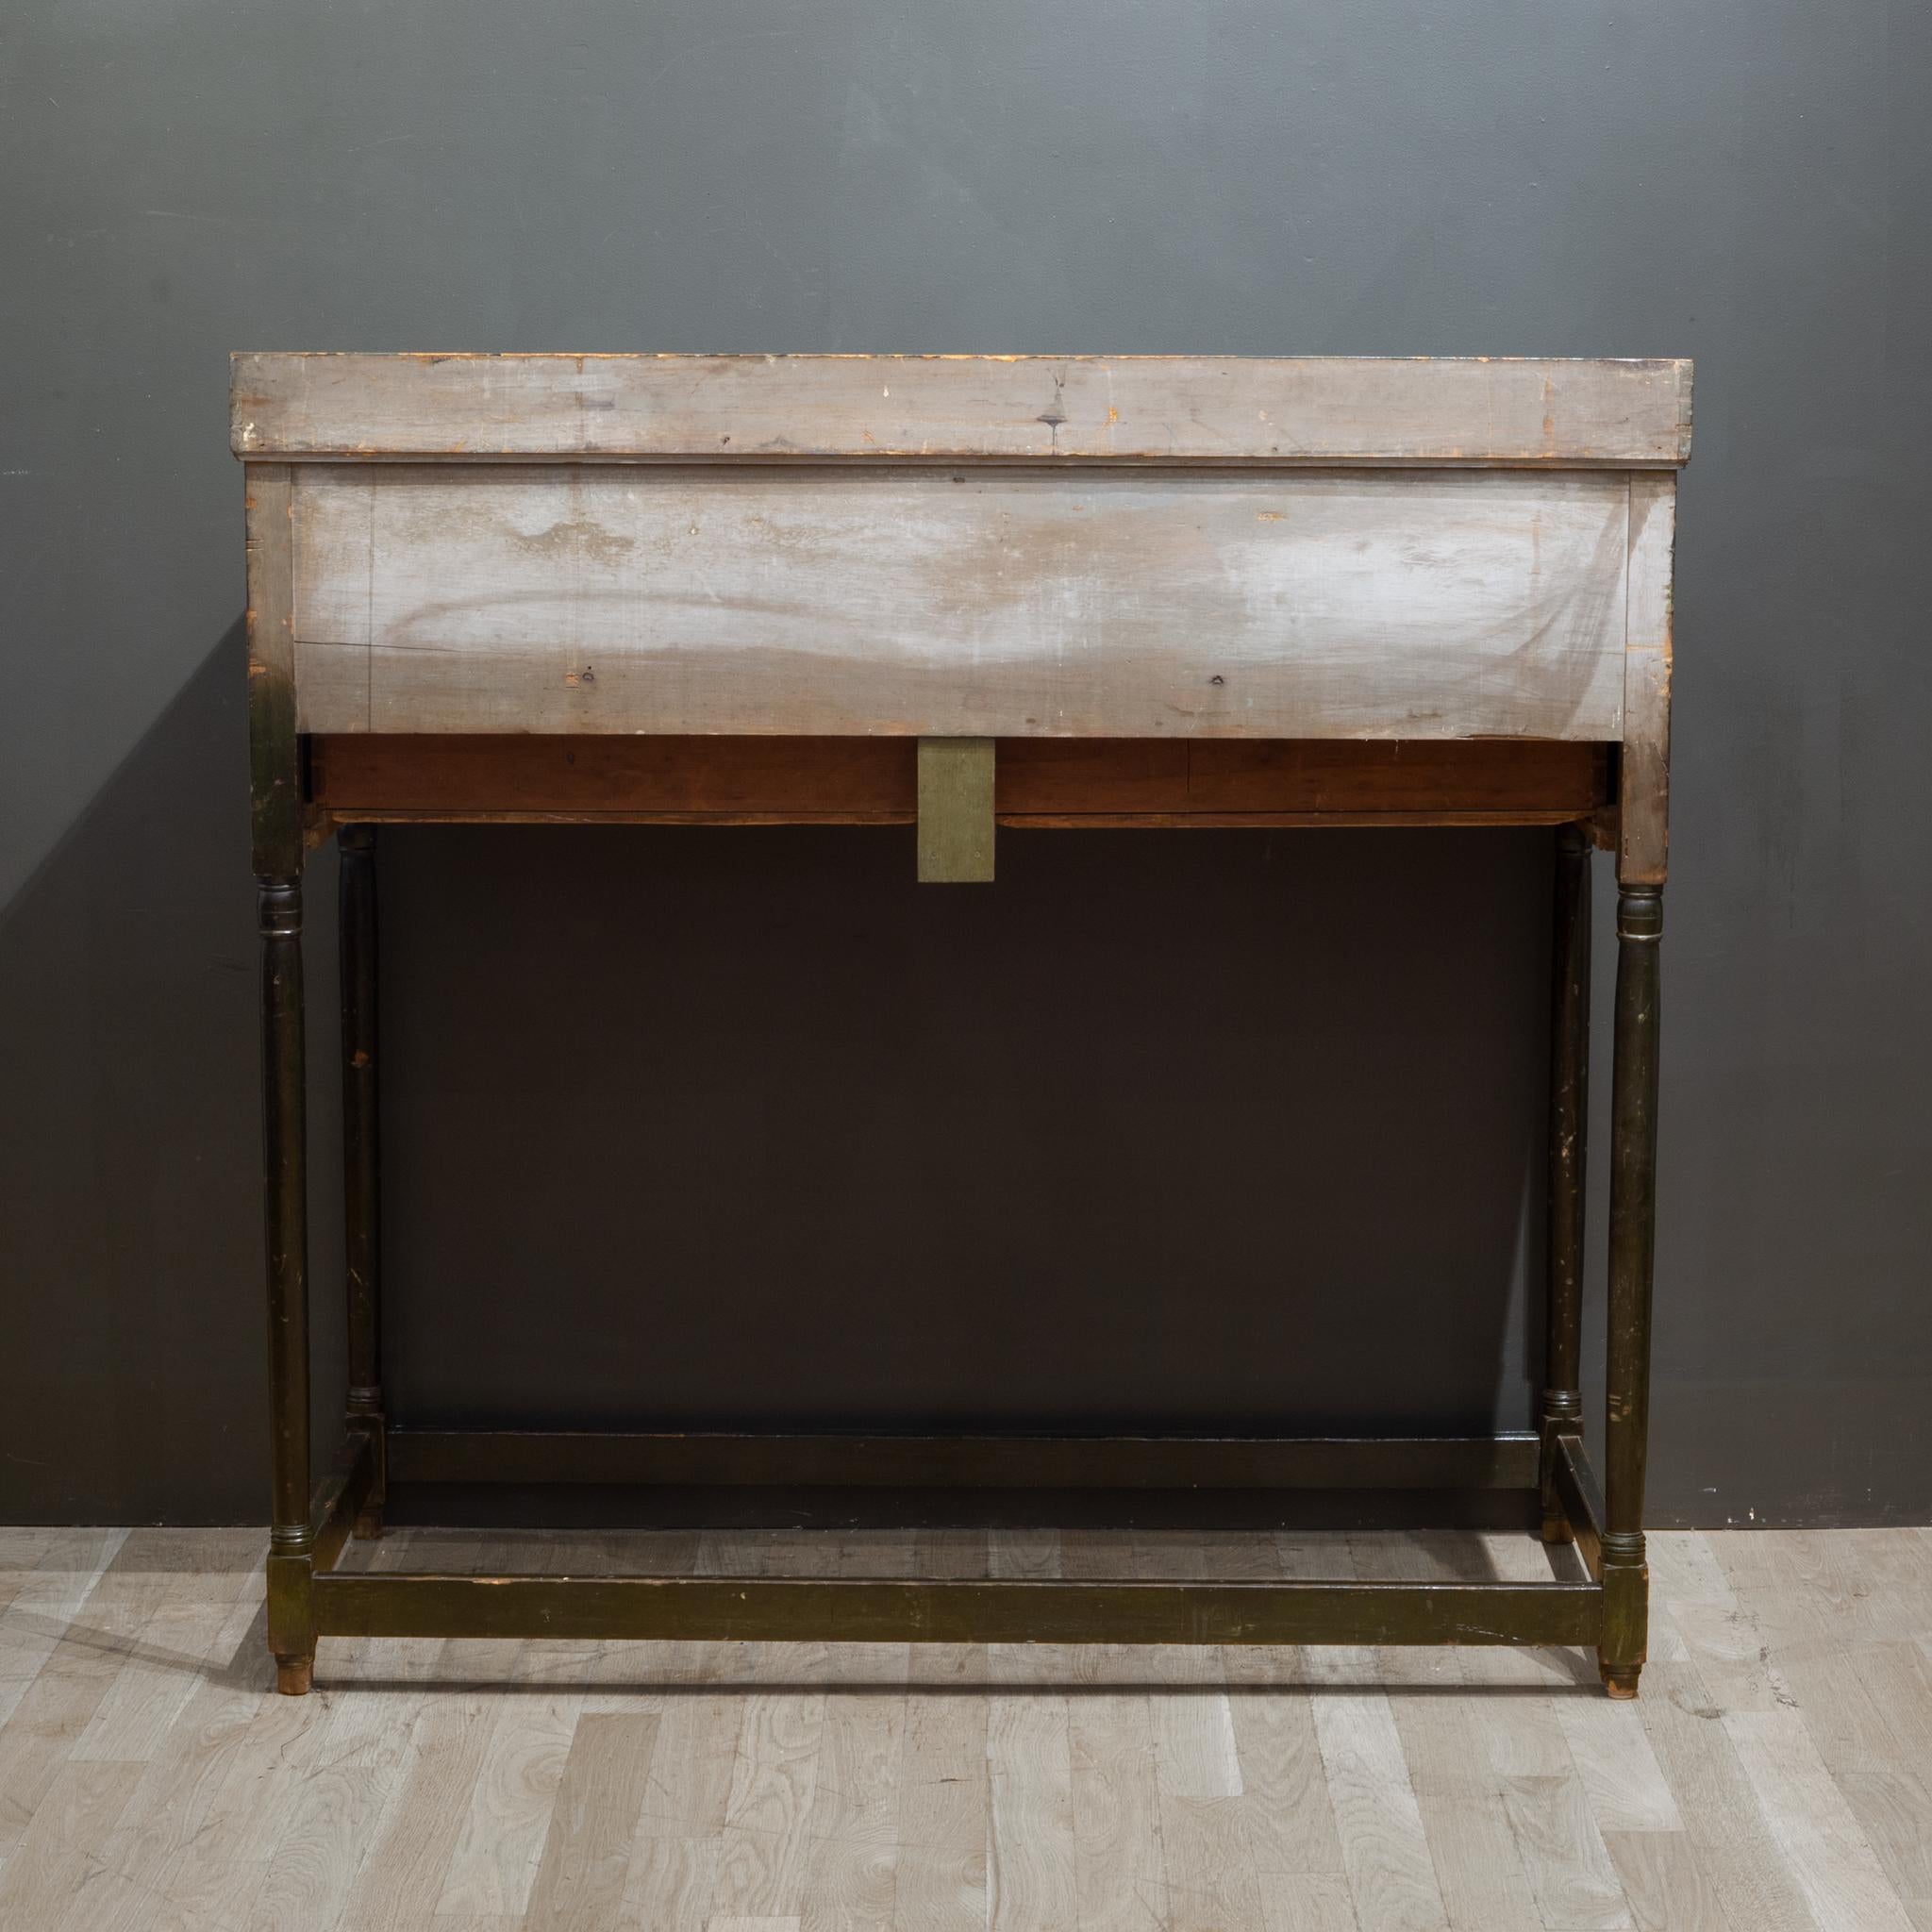 Industrial Mid 19th C. Postmaster's Desk, c.1850-Contact us for more affordable shipping 